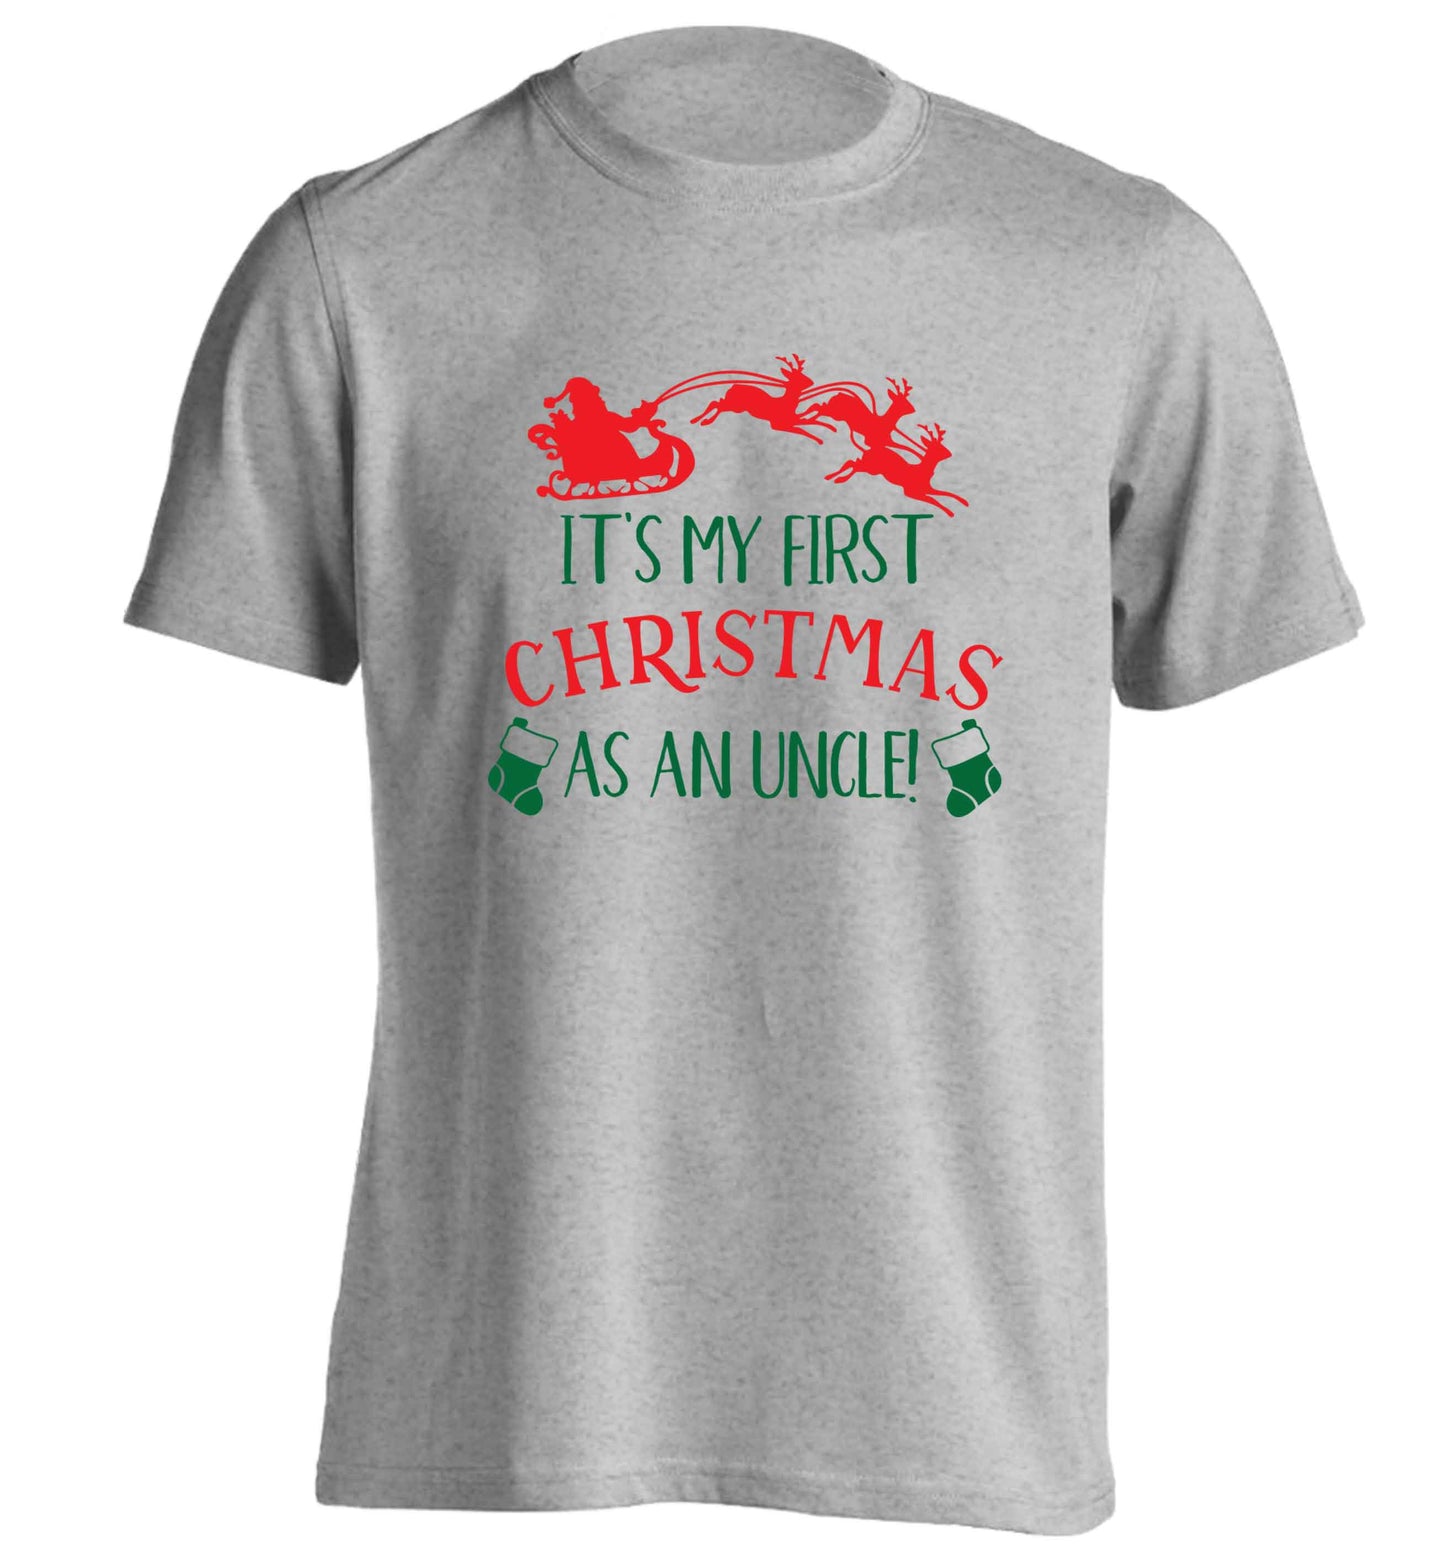 It's my first Christmas as an uncle! adults unisex grey Tshirt 2XL